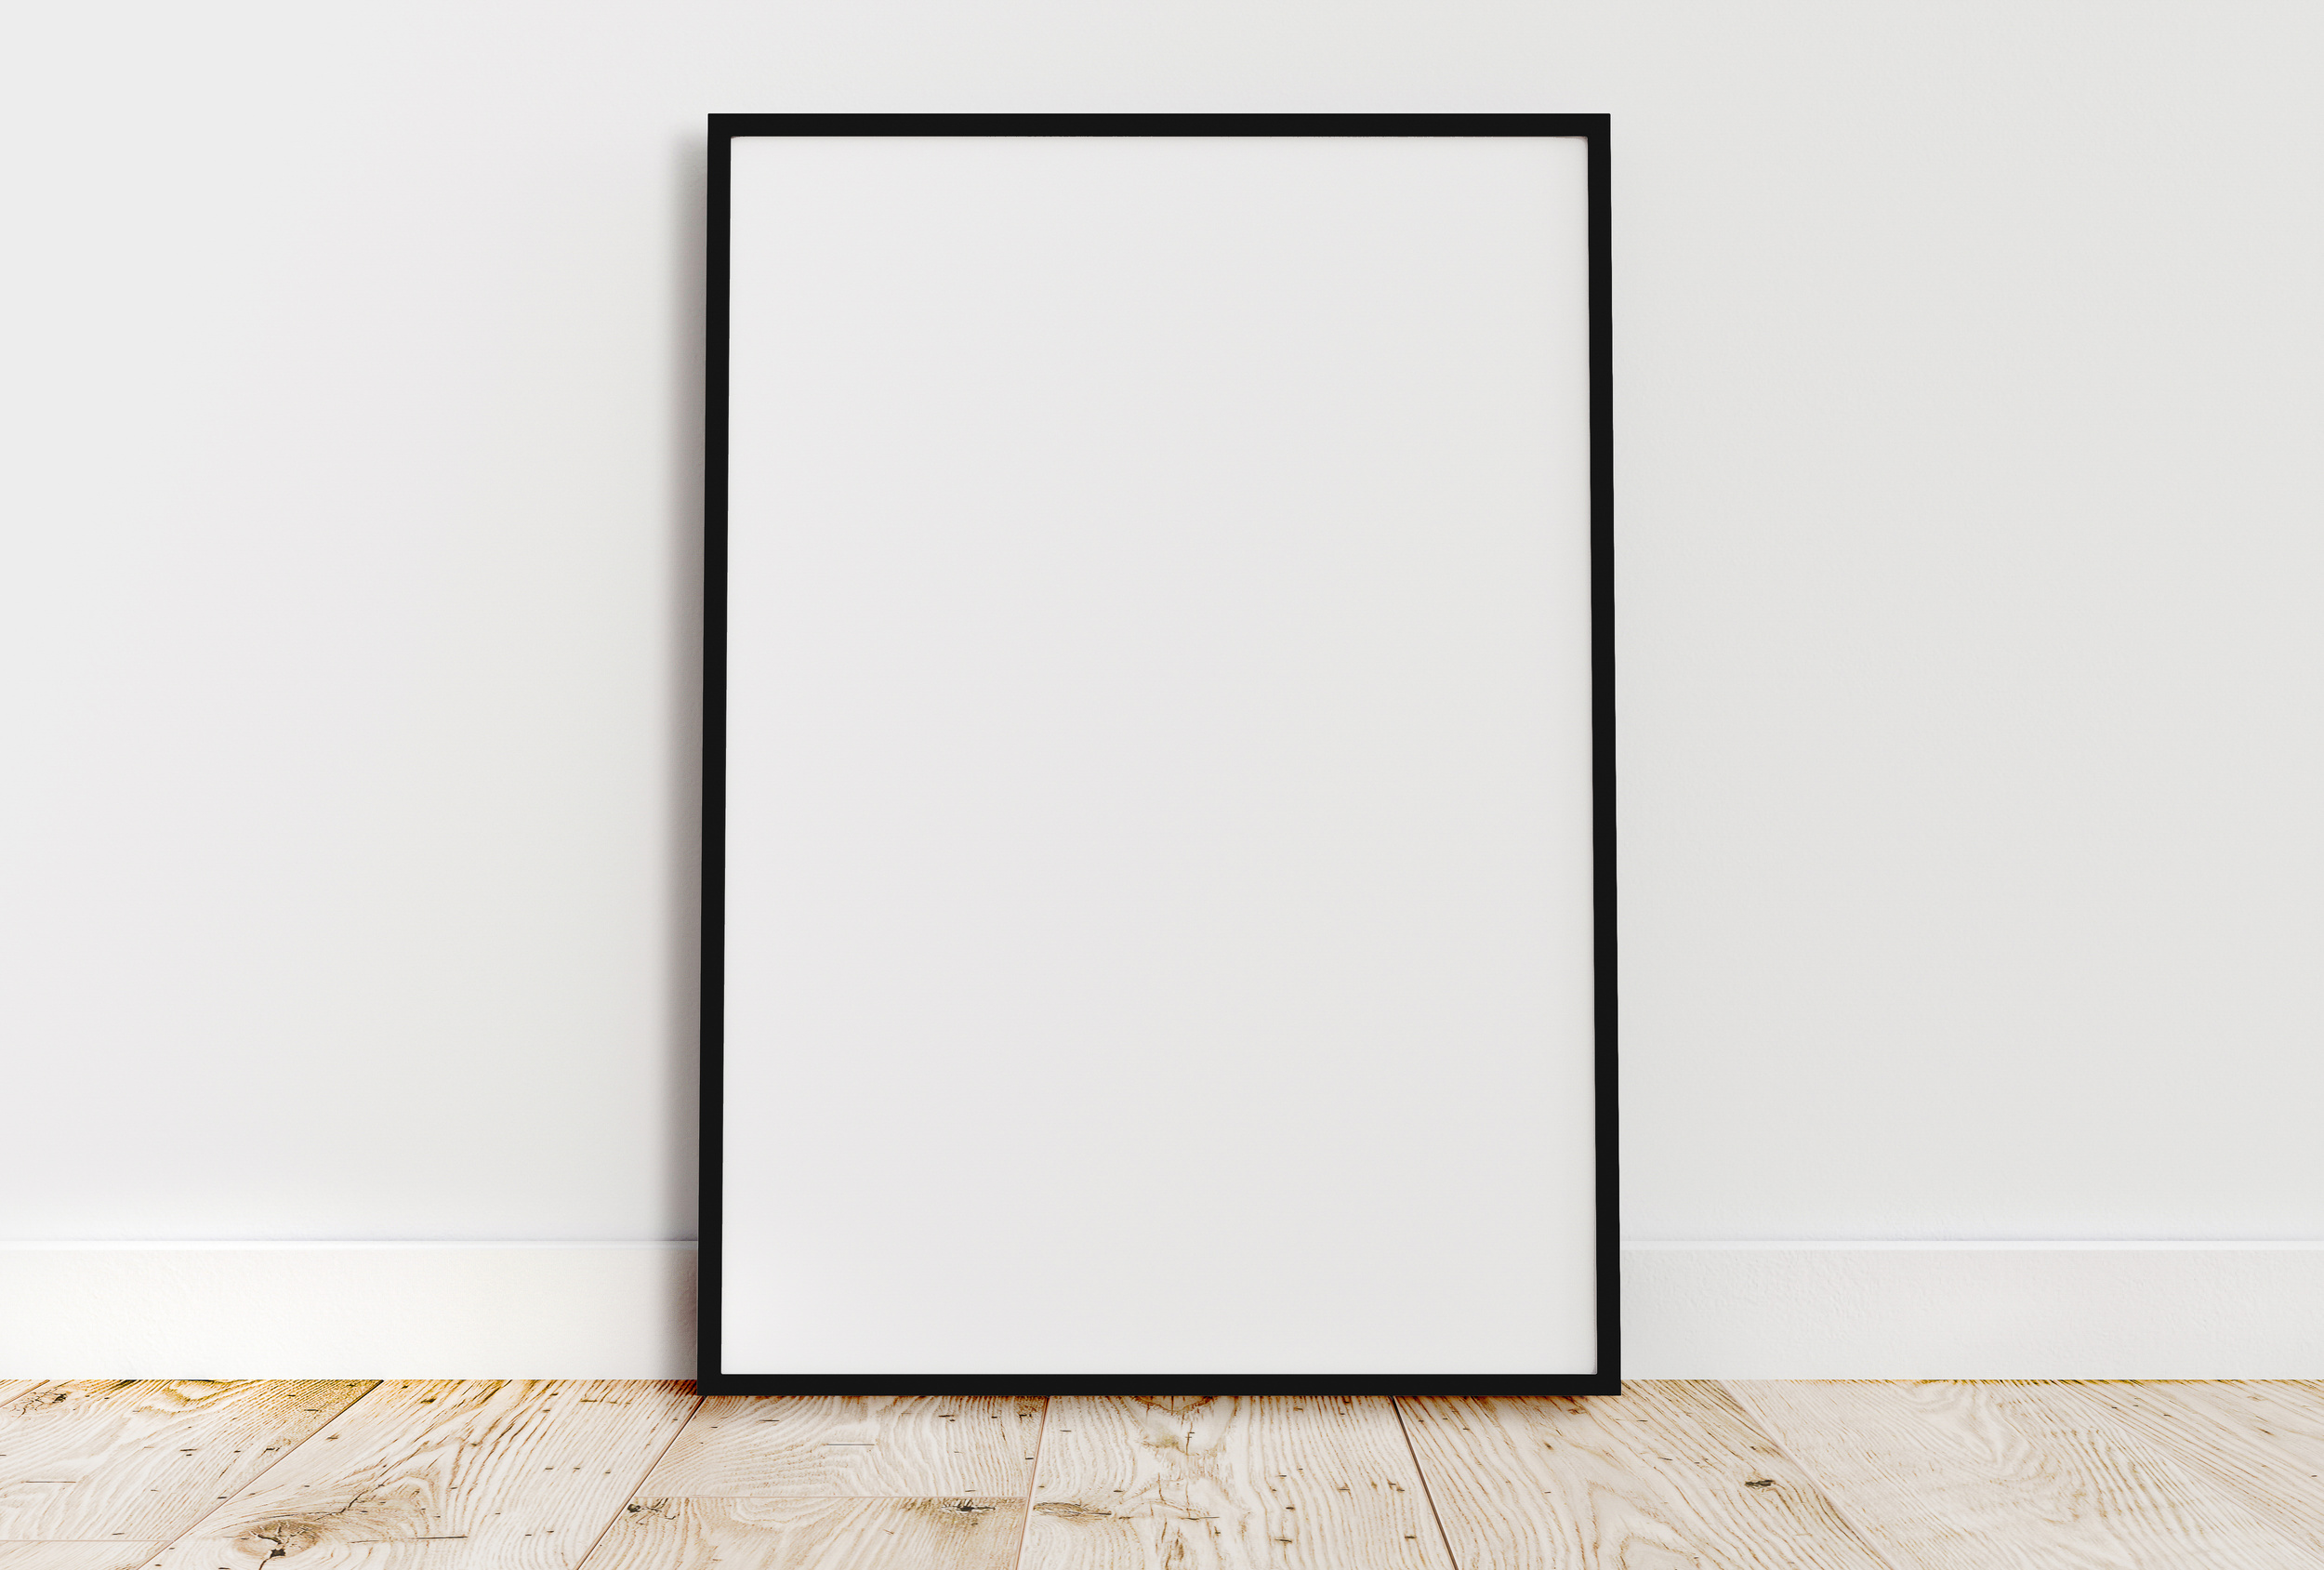 Empty Frame on Light Wooden Floor and White Wall